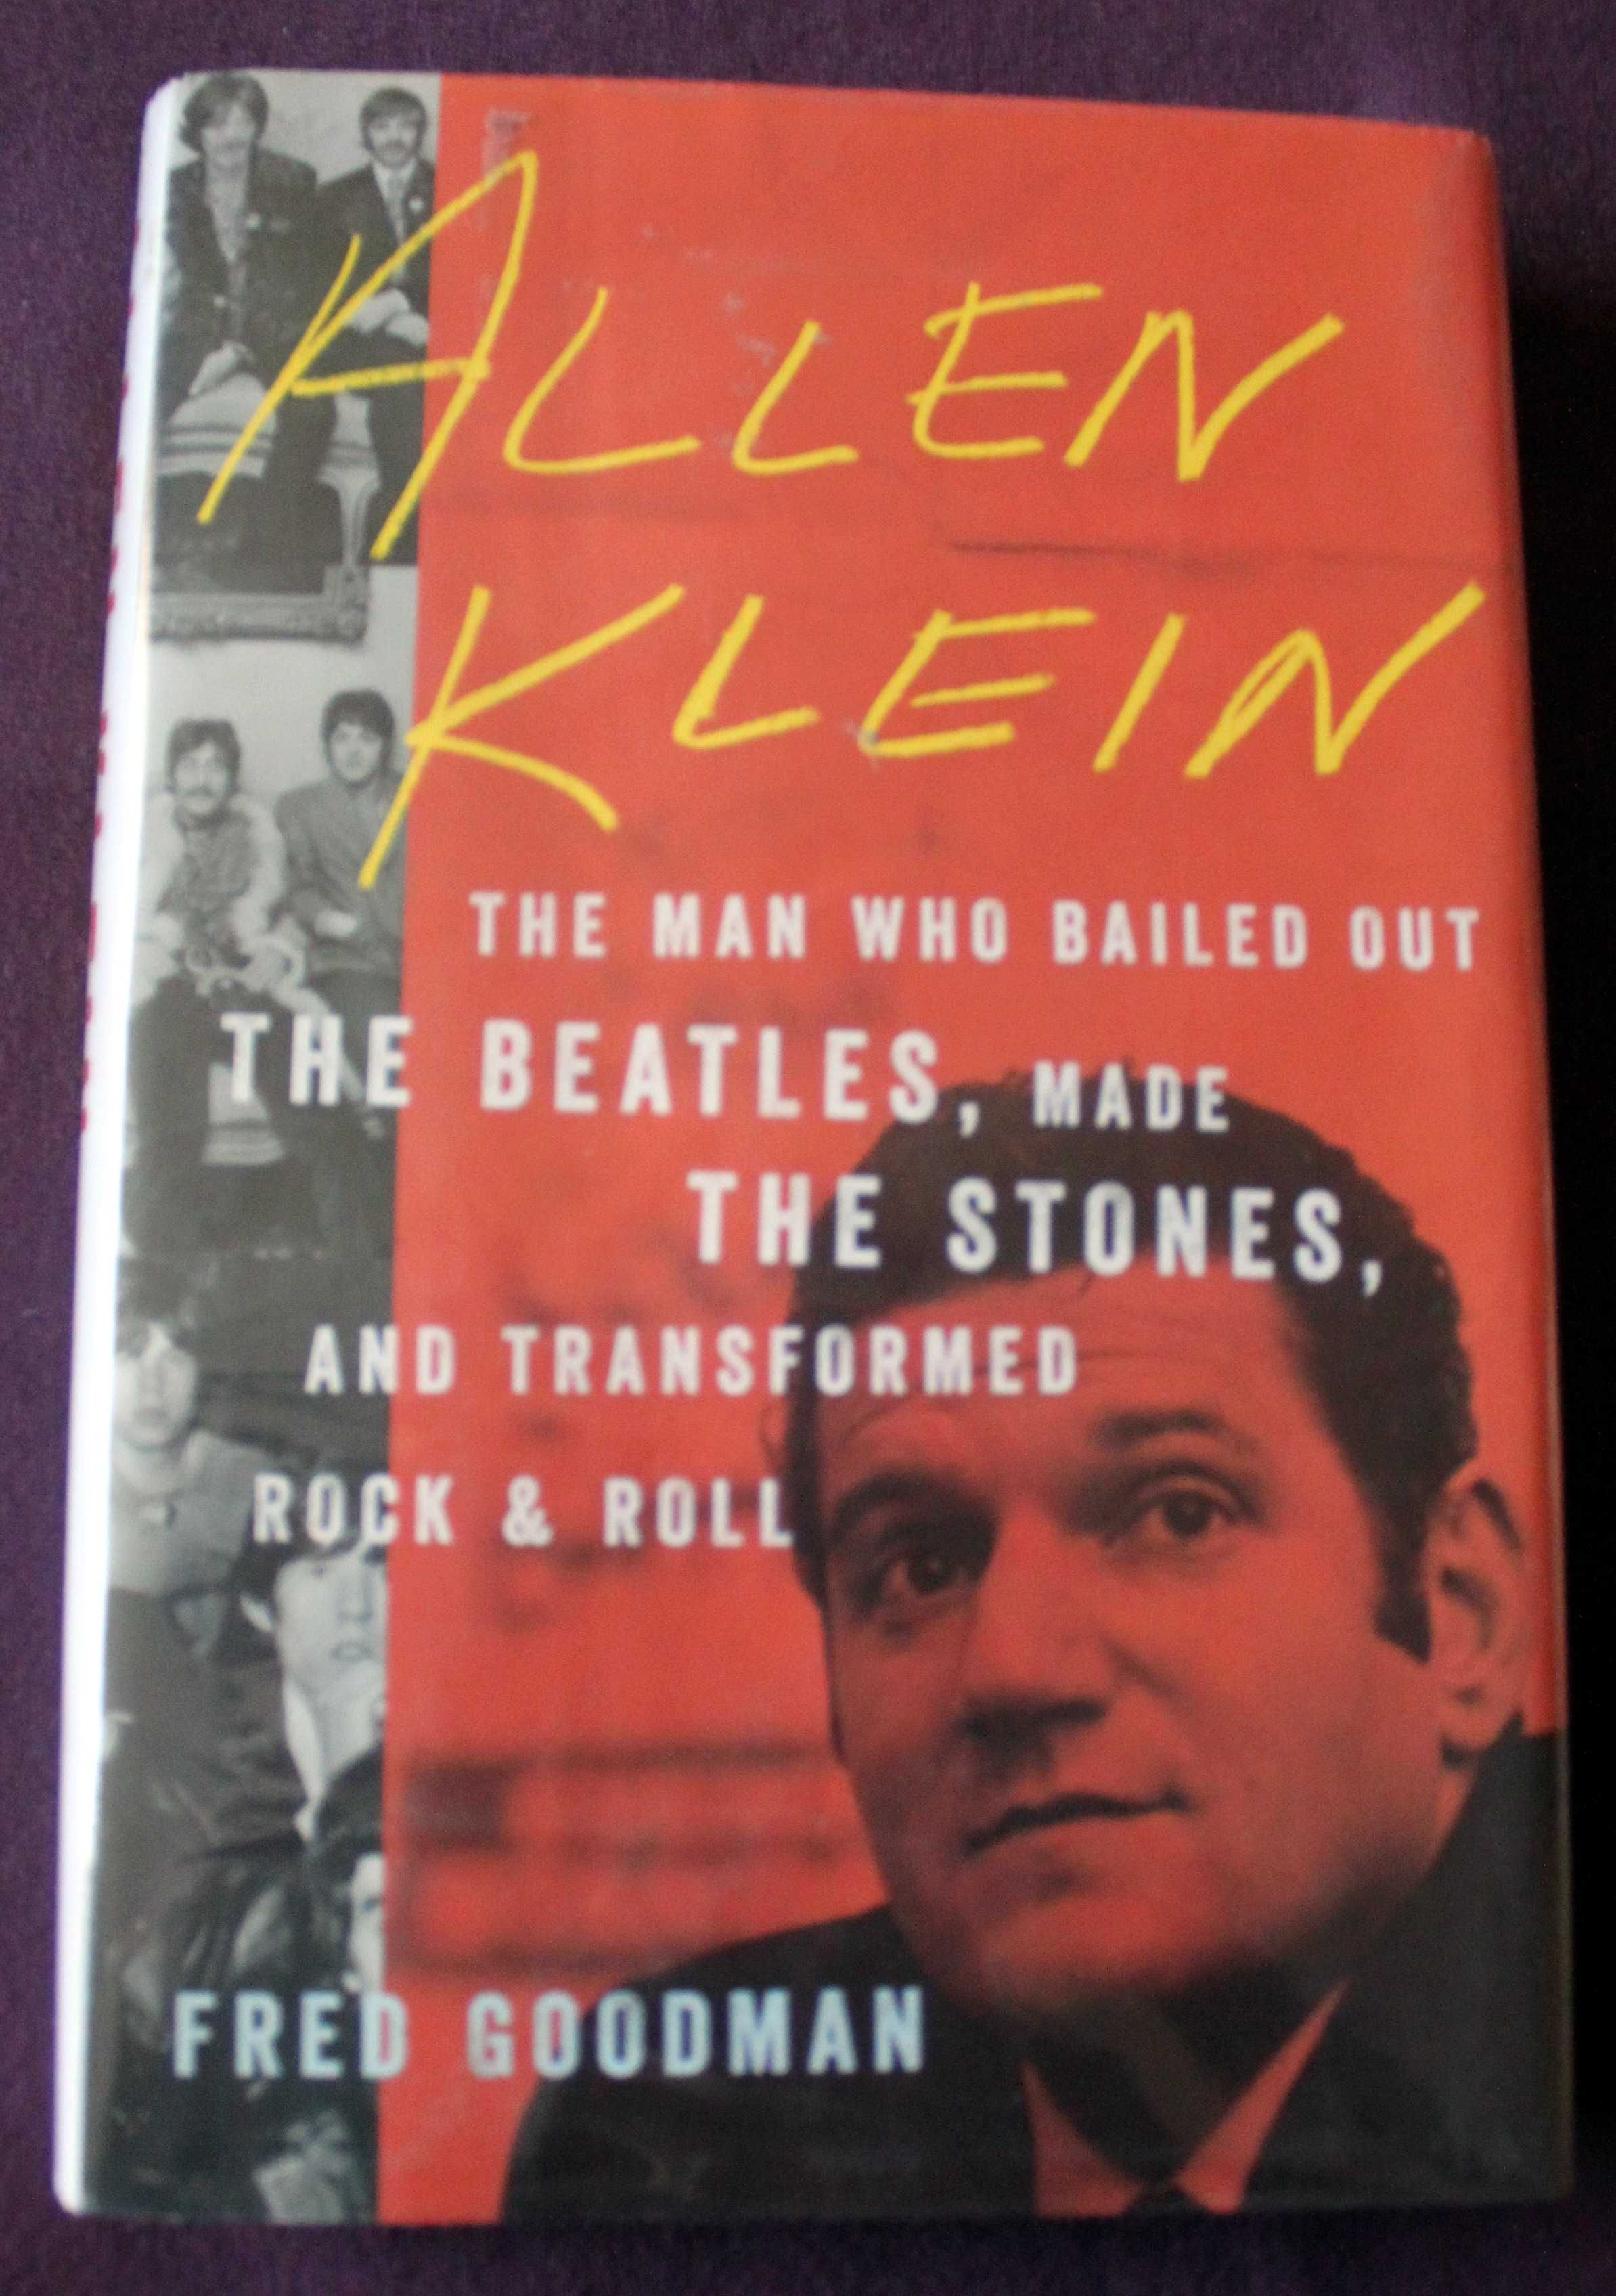 Allen Klein - Man Who Bailed Out Beatles, The Stones Fred Goodman